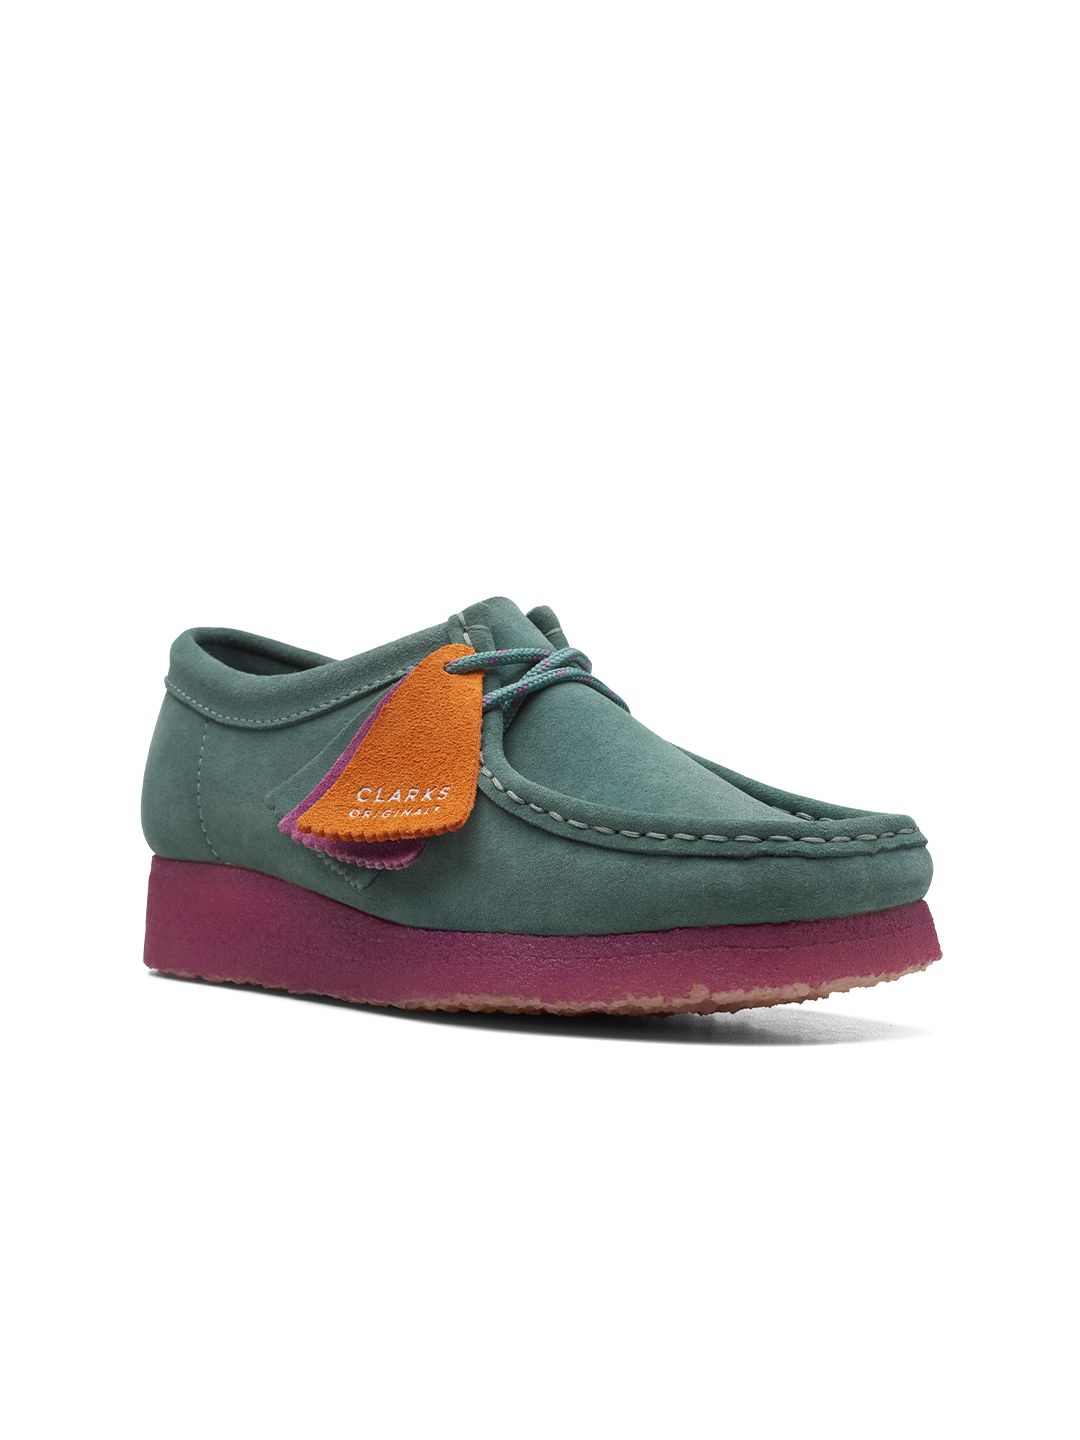 Clarks Women Teal Suede Slip-On Sneakers Price in India